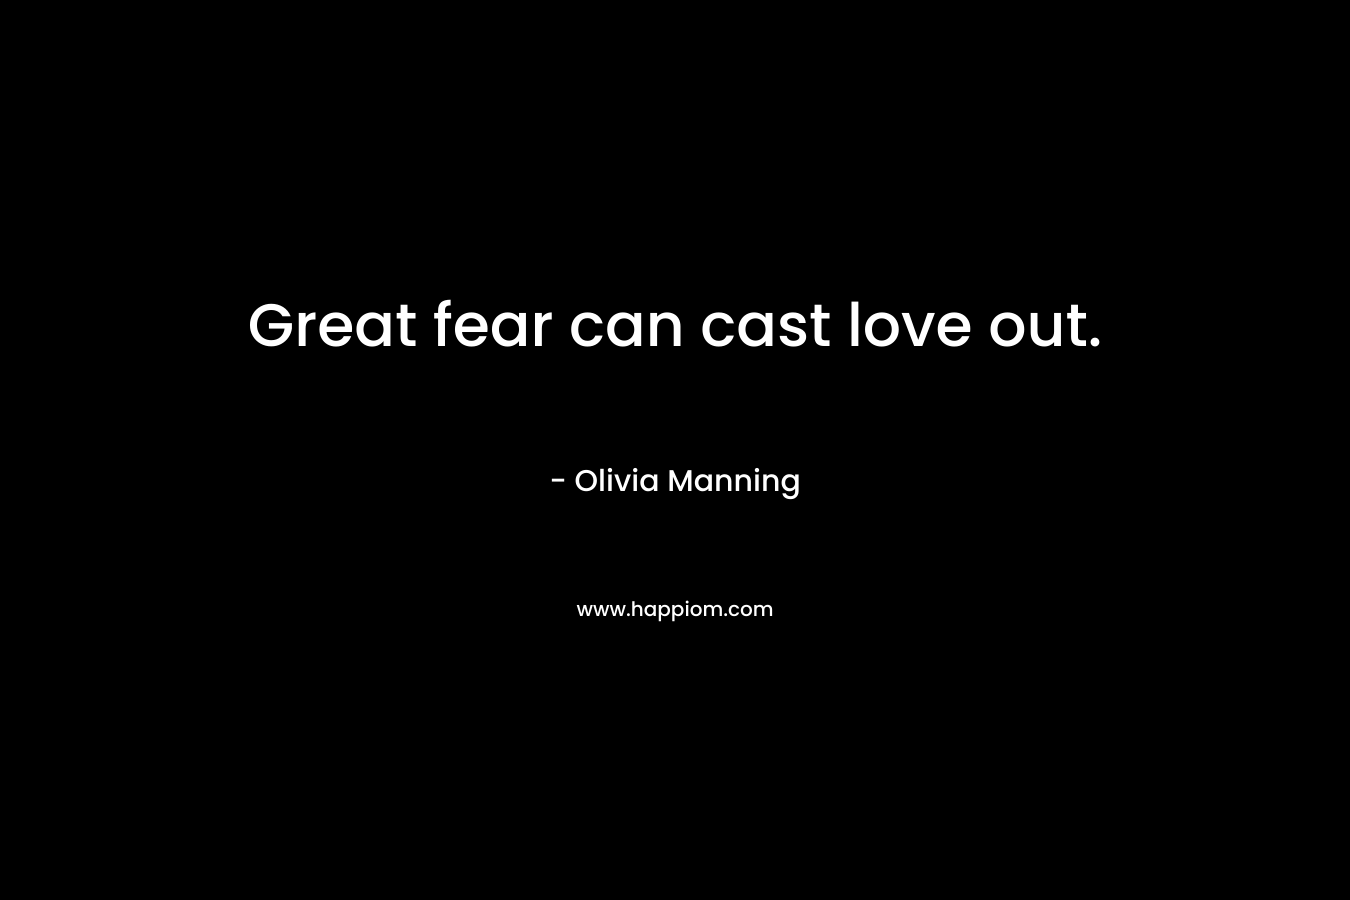 Great fear can cast love out.